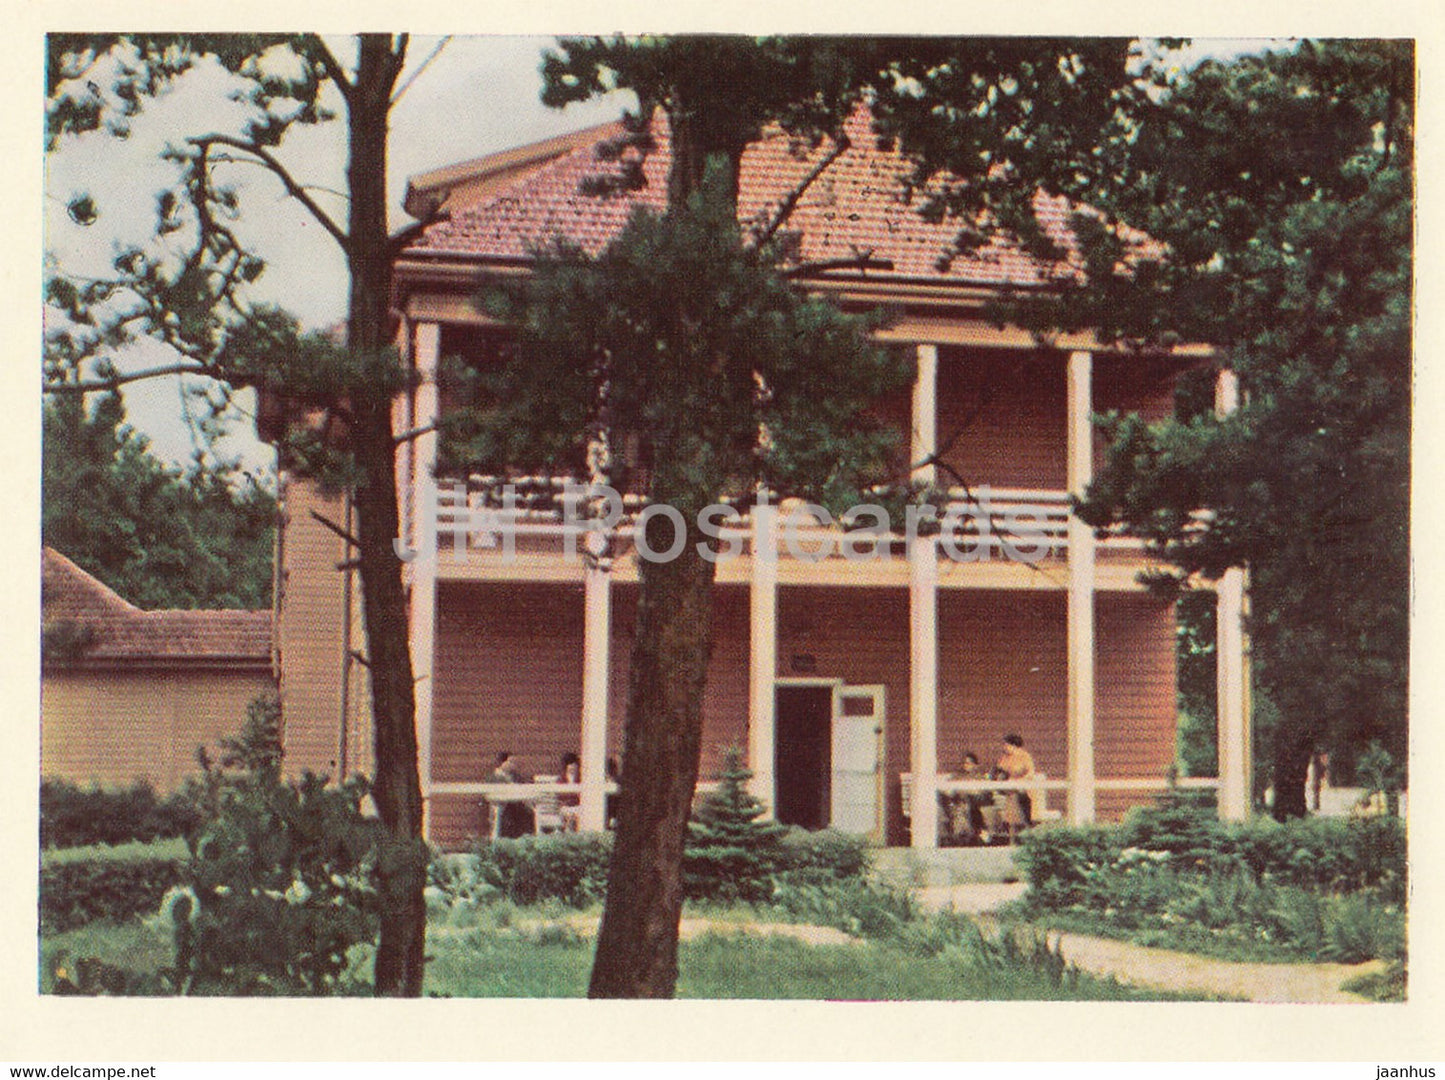 Palanga - Amidst Groves of Slender Pines Stand Numerous Rest Homes - 1 - Lithuania USSR - unused - JH Postcards